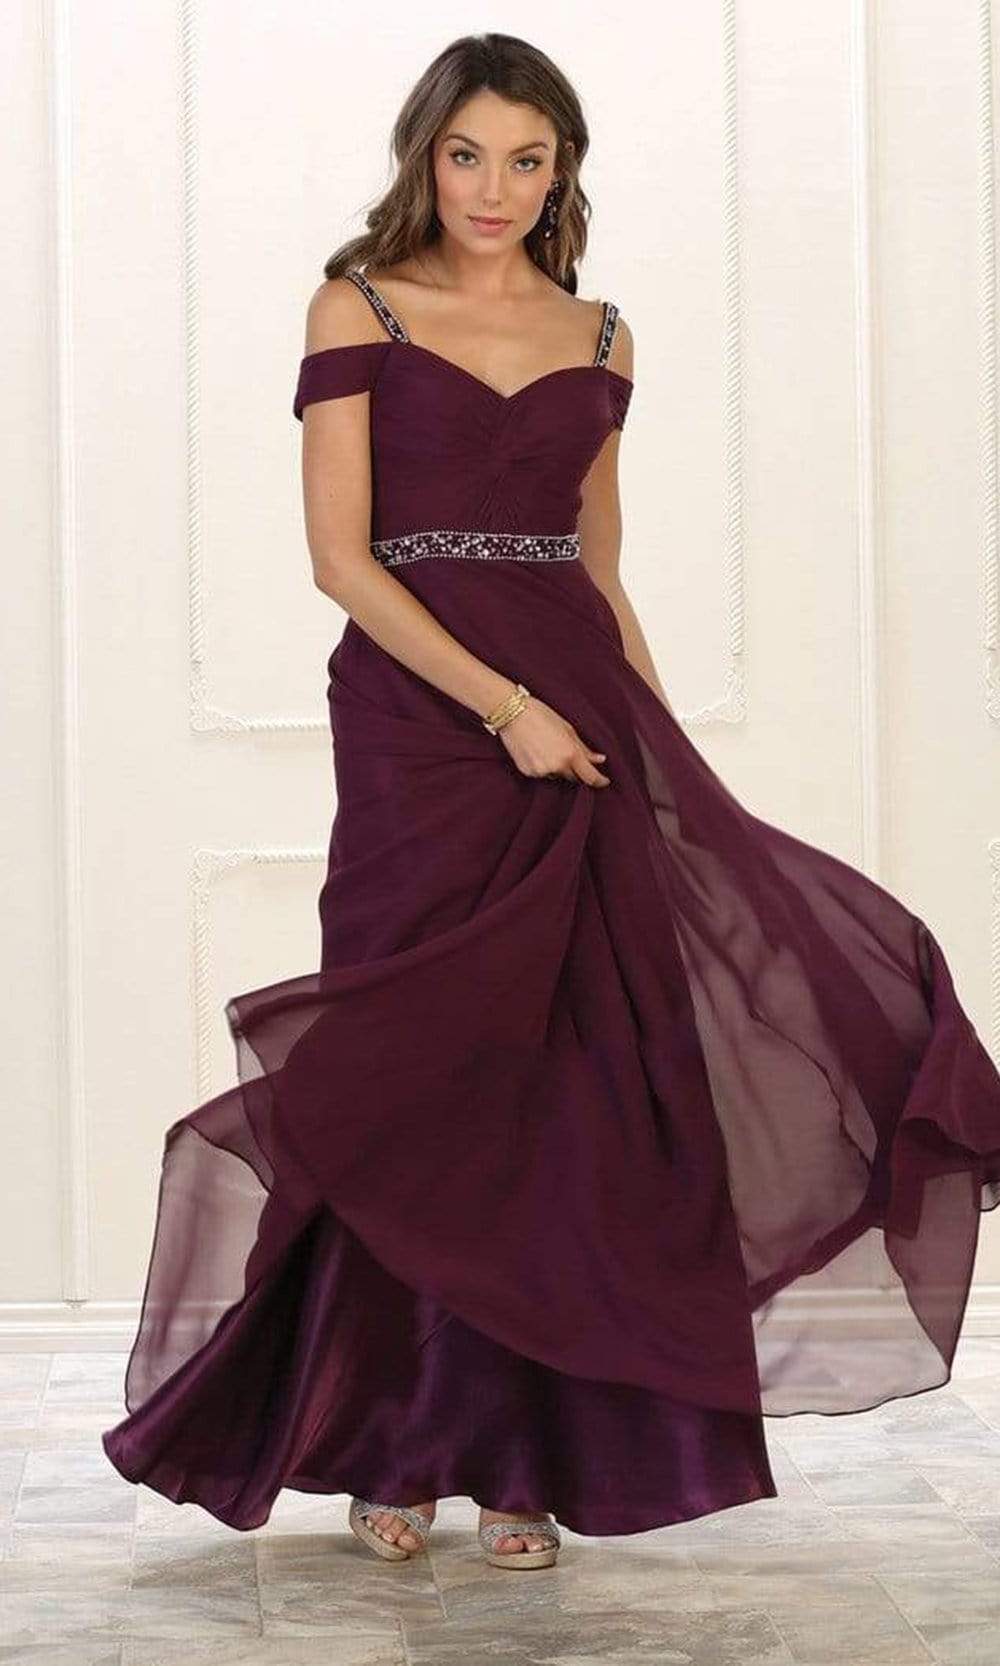 May Queen - MQ1515 Embellished Cold Shoulder Knotted A-Line Gown